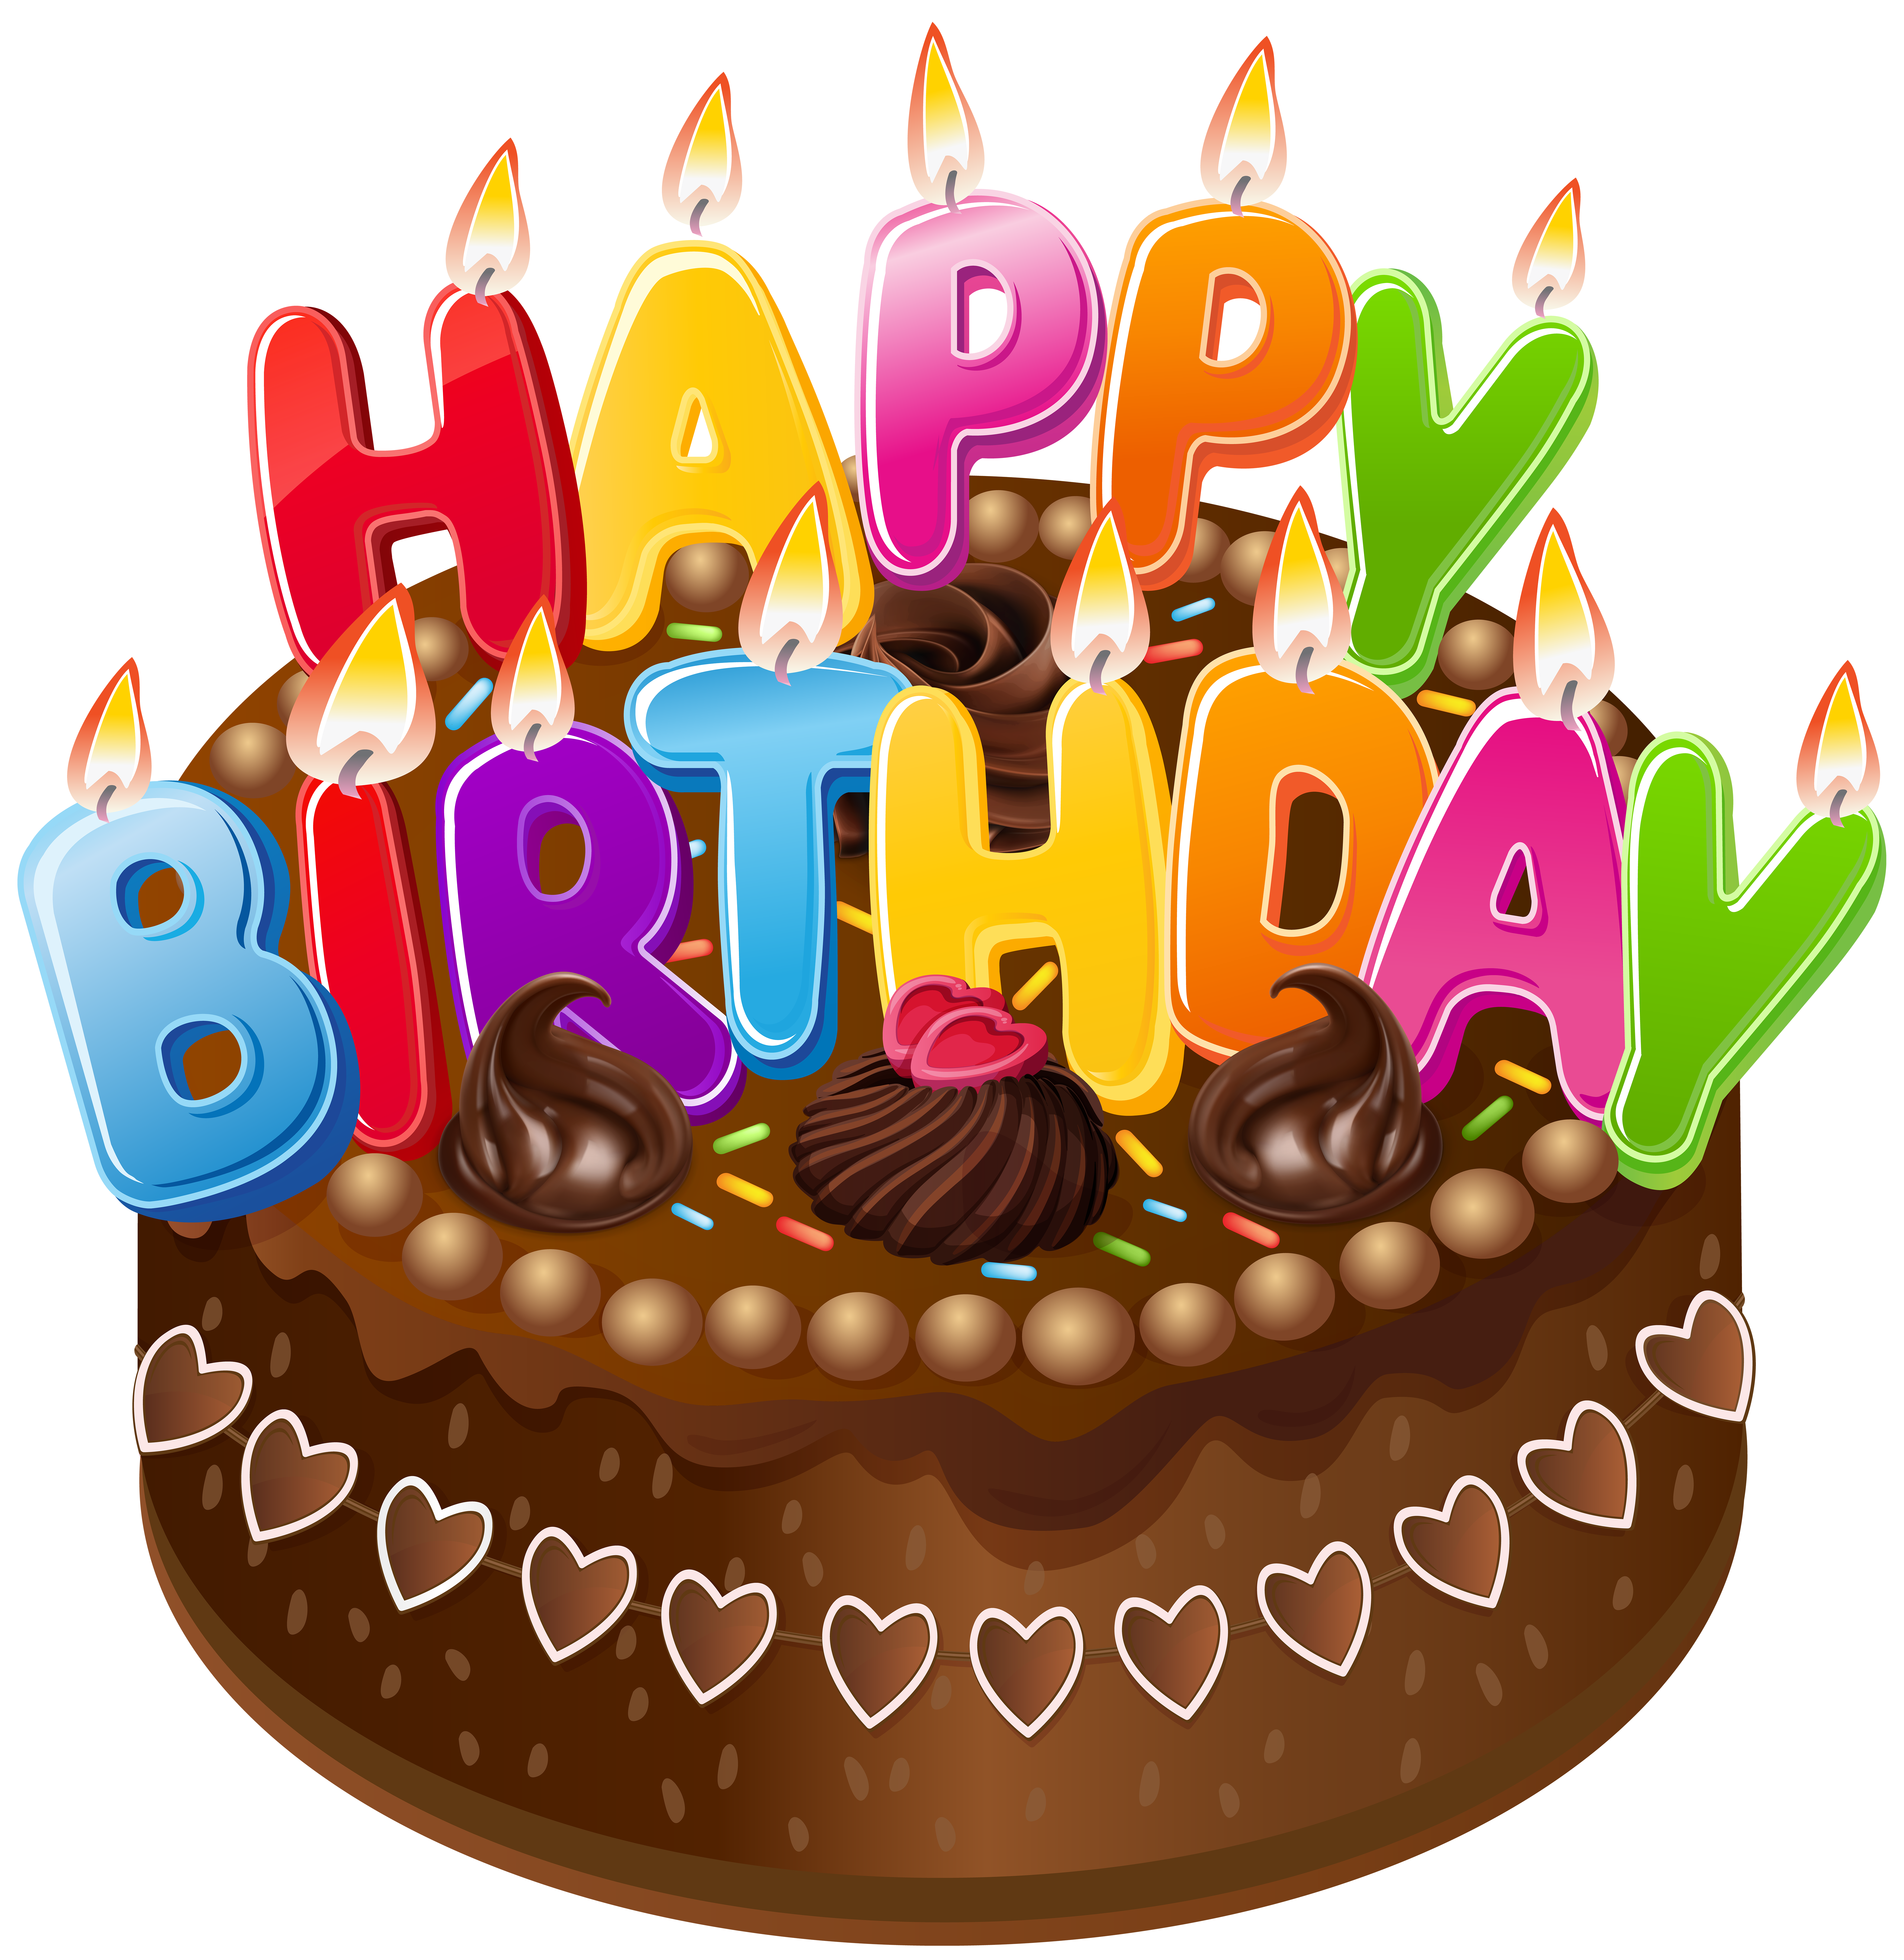 Birthday Cake PNG Image - PurePNG | Free transparent CC0 PNG Image Library